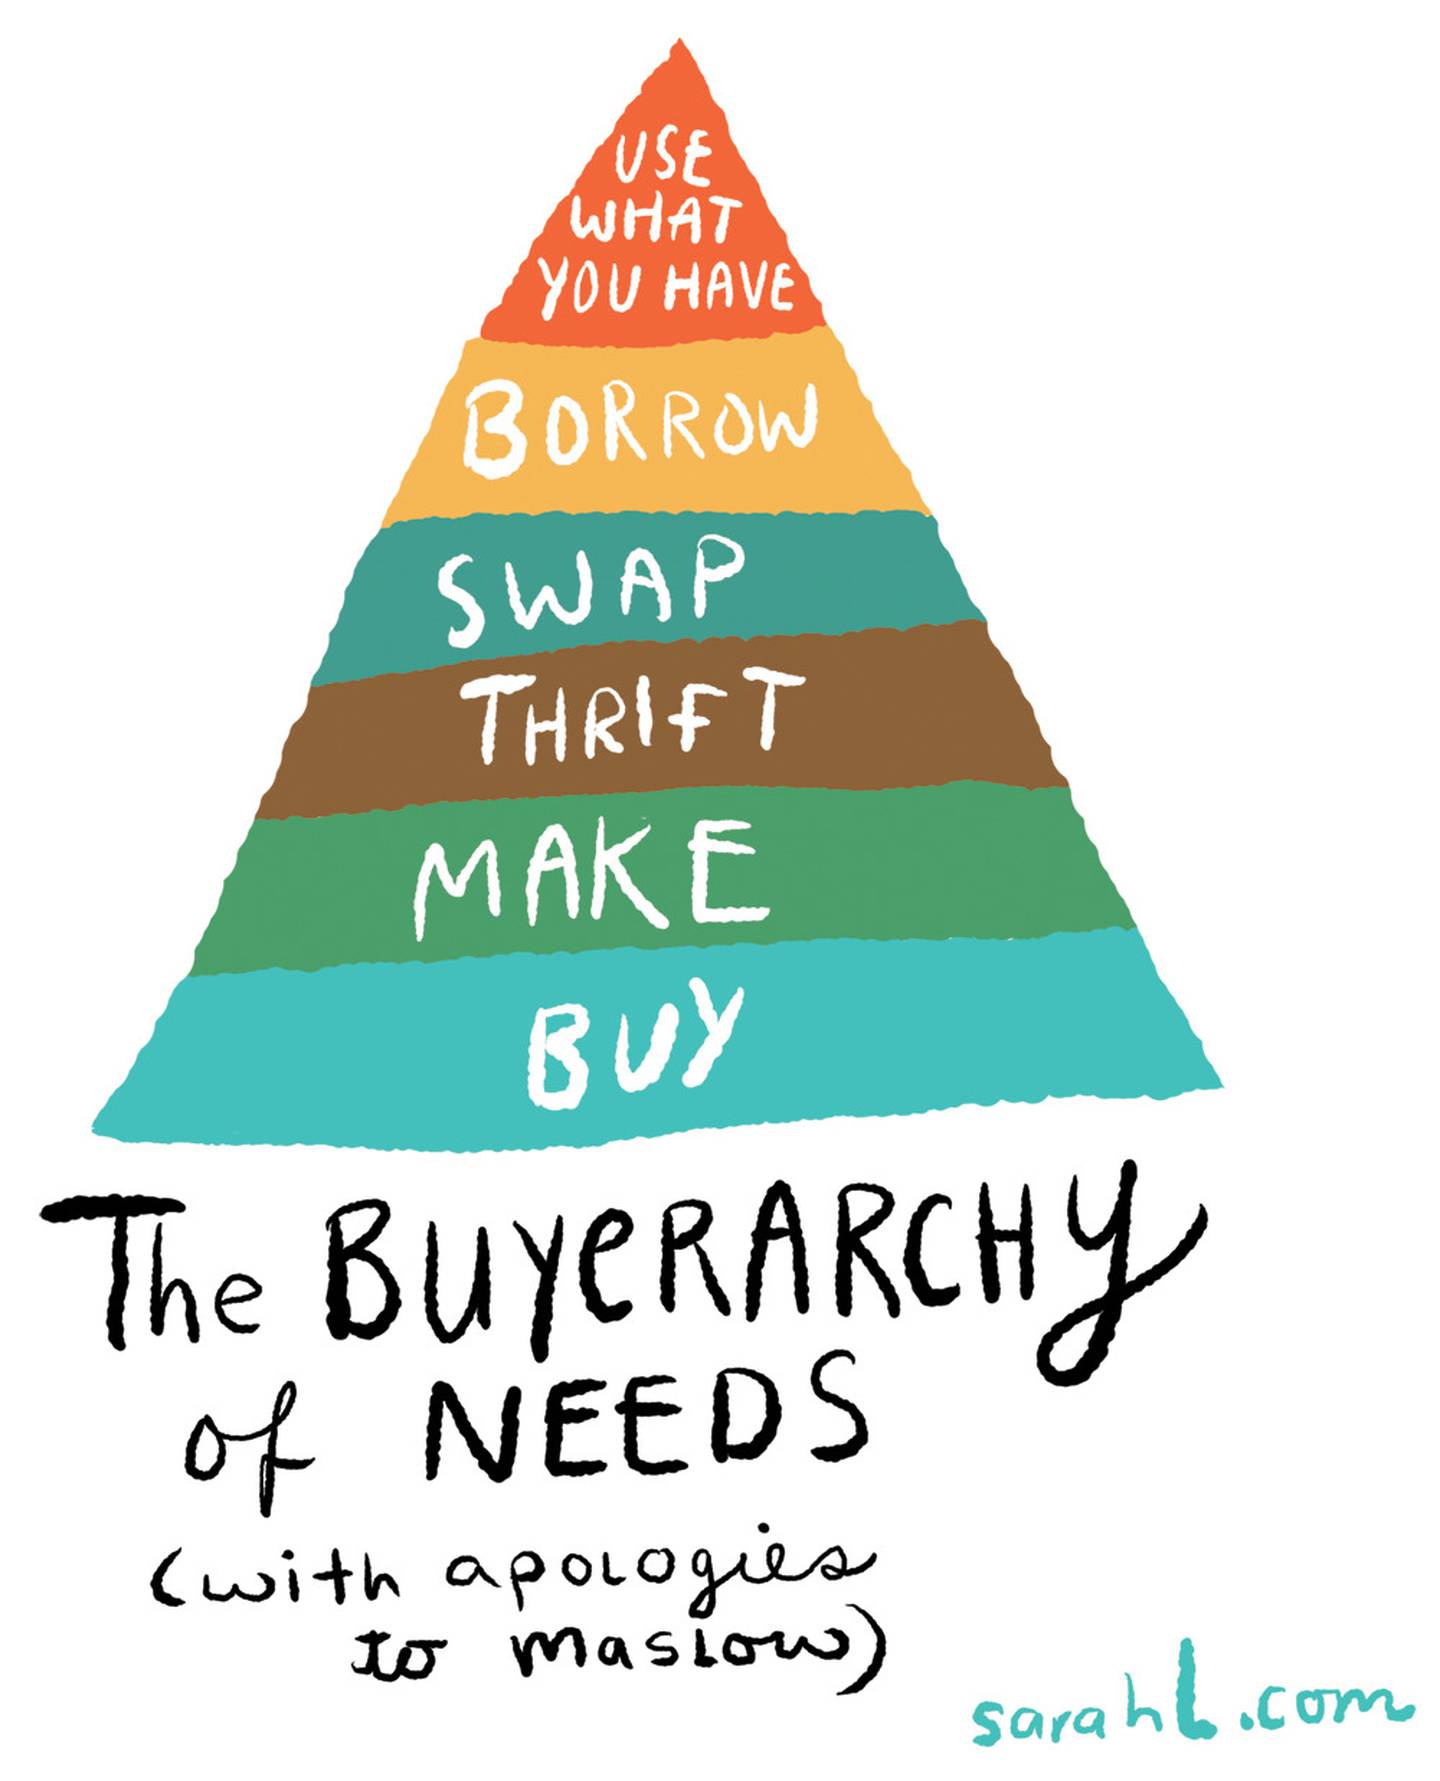 The Buyerarchy of Needs pyramid puts "Buy" at its broad base and “Use what you have” at its slim tip. Photo: Fashion Revolution UAE